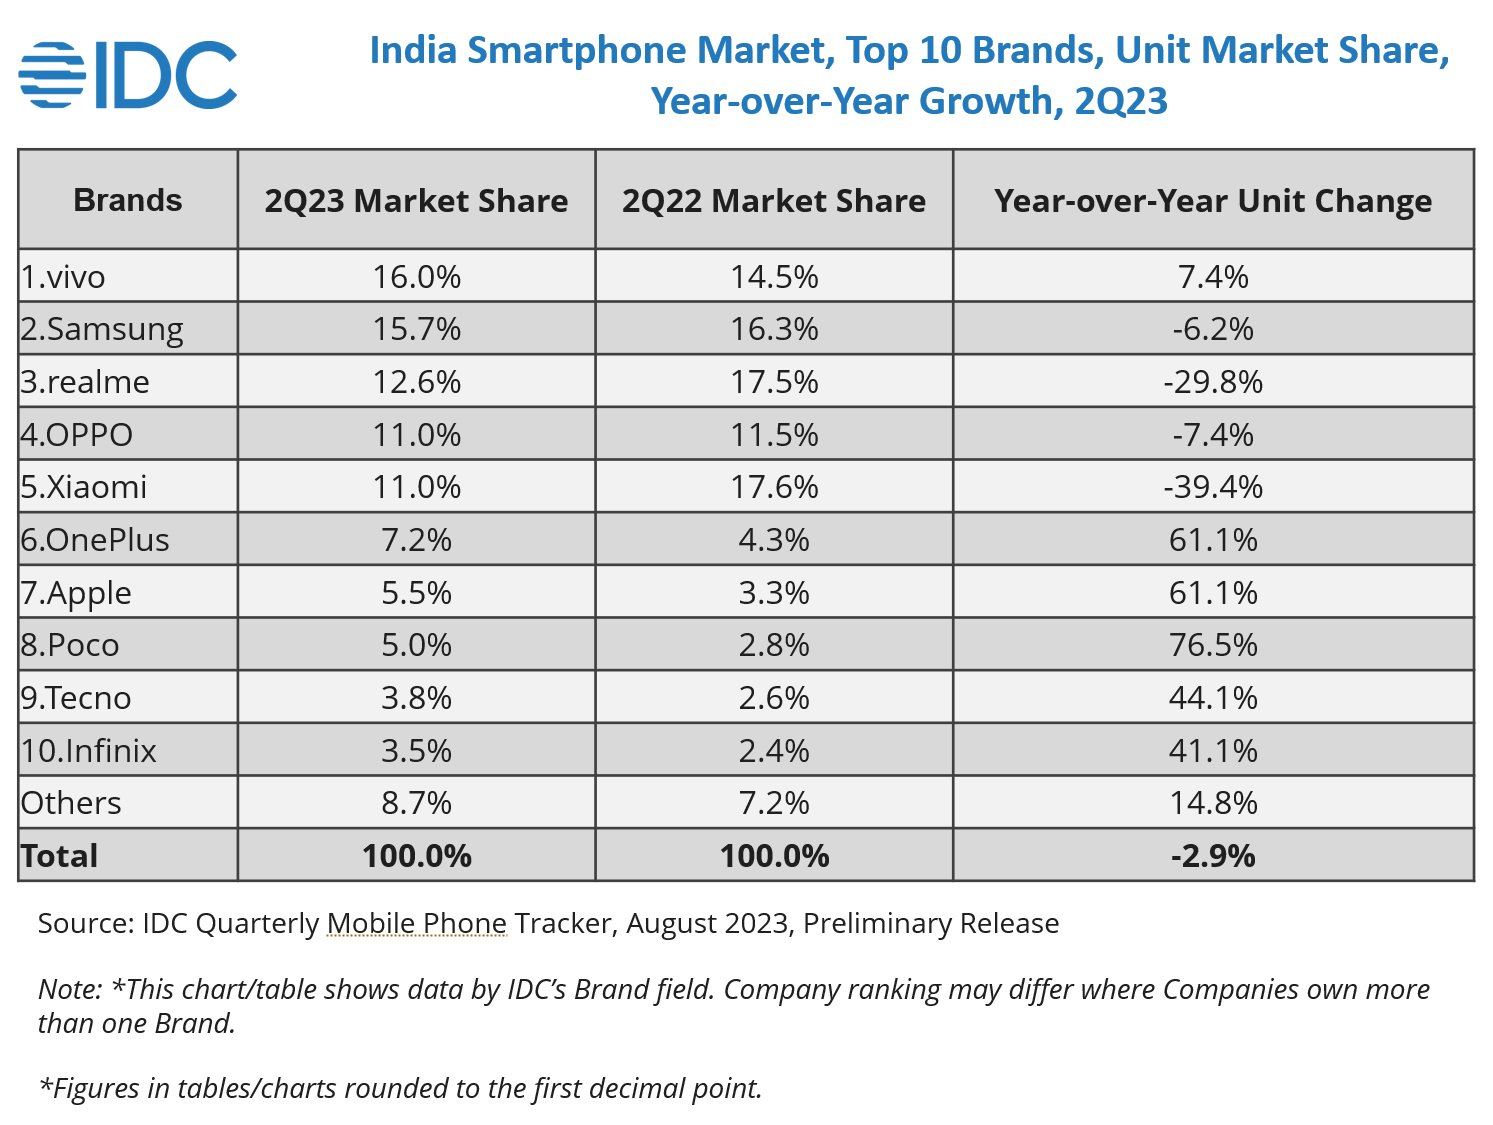 India Smartphone Market Declines by 10% YoY in 1H23 with 64 million units,  Says IDC